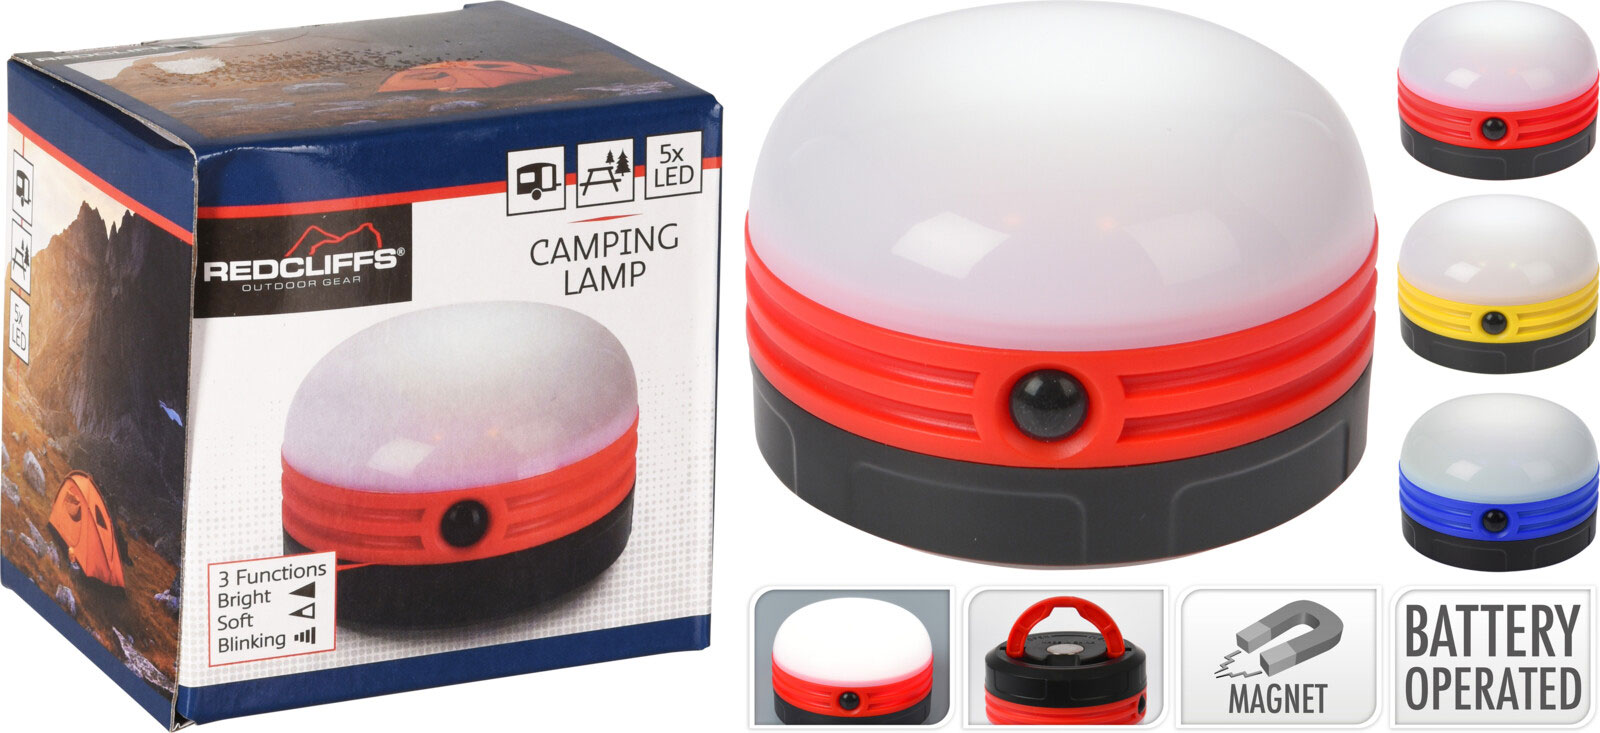 CAMPING LIGHT PUSH FUNCTION 3 ASSORTED COLORS